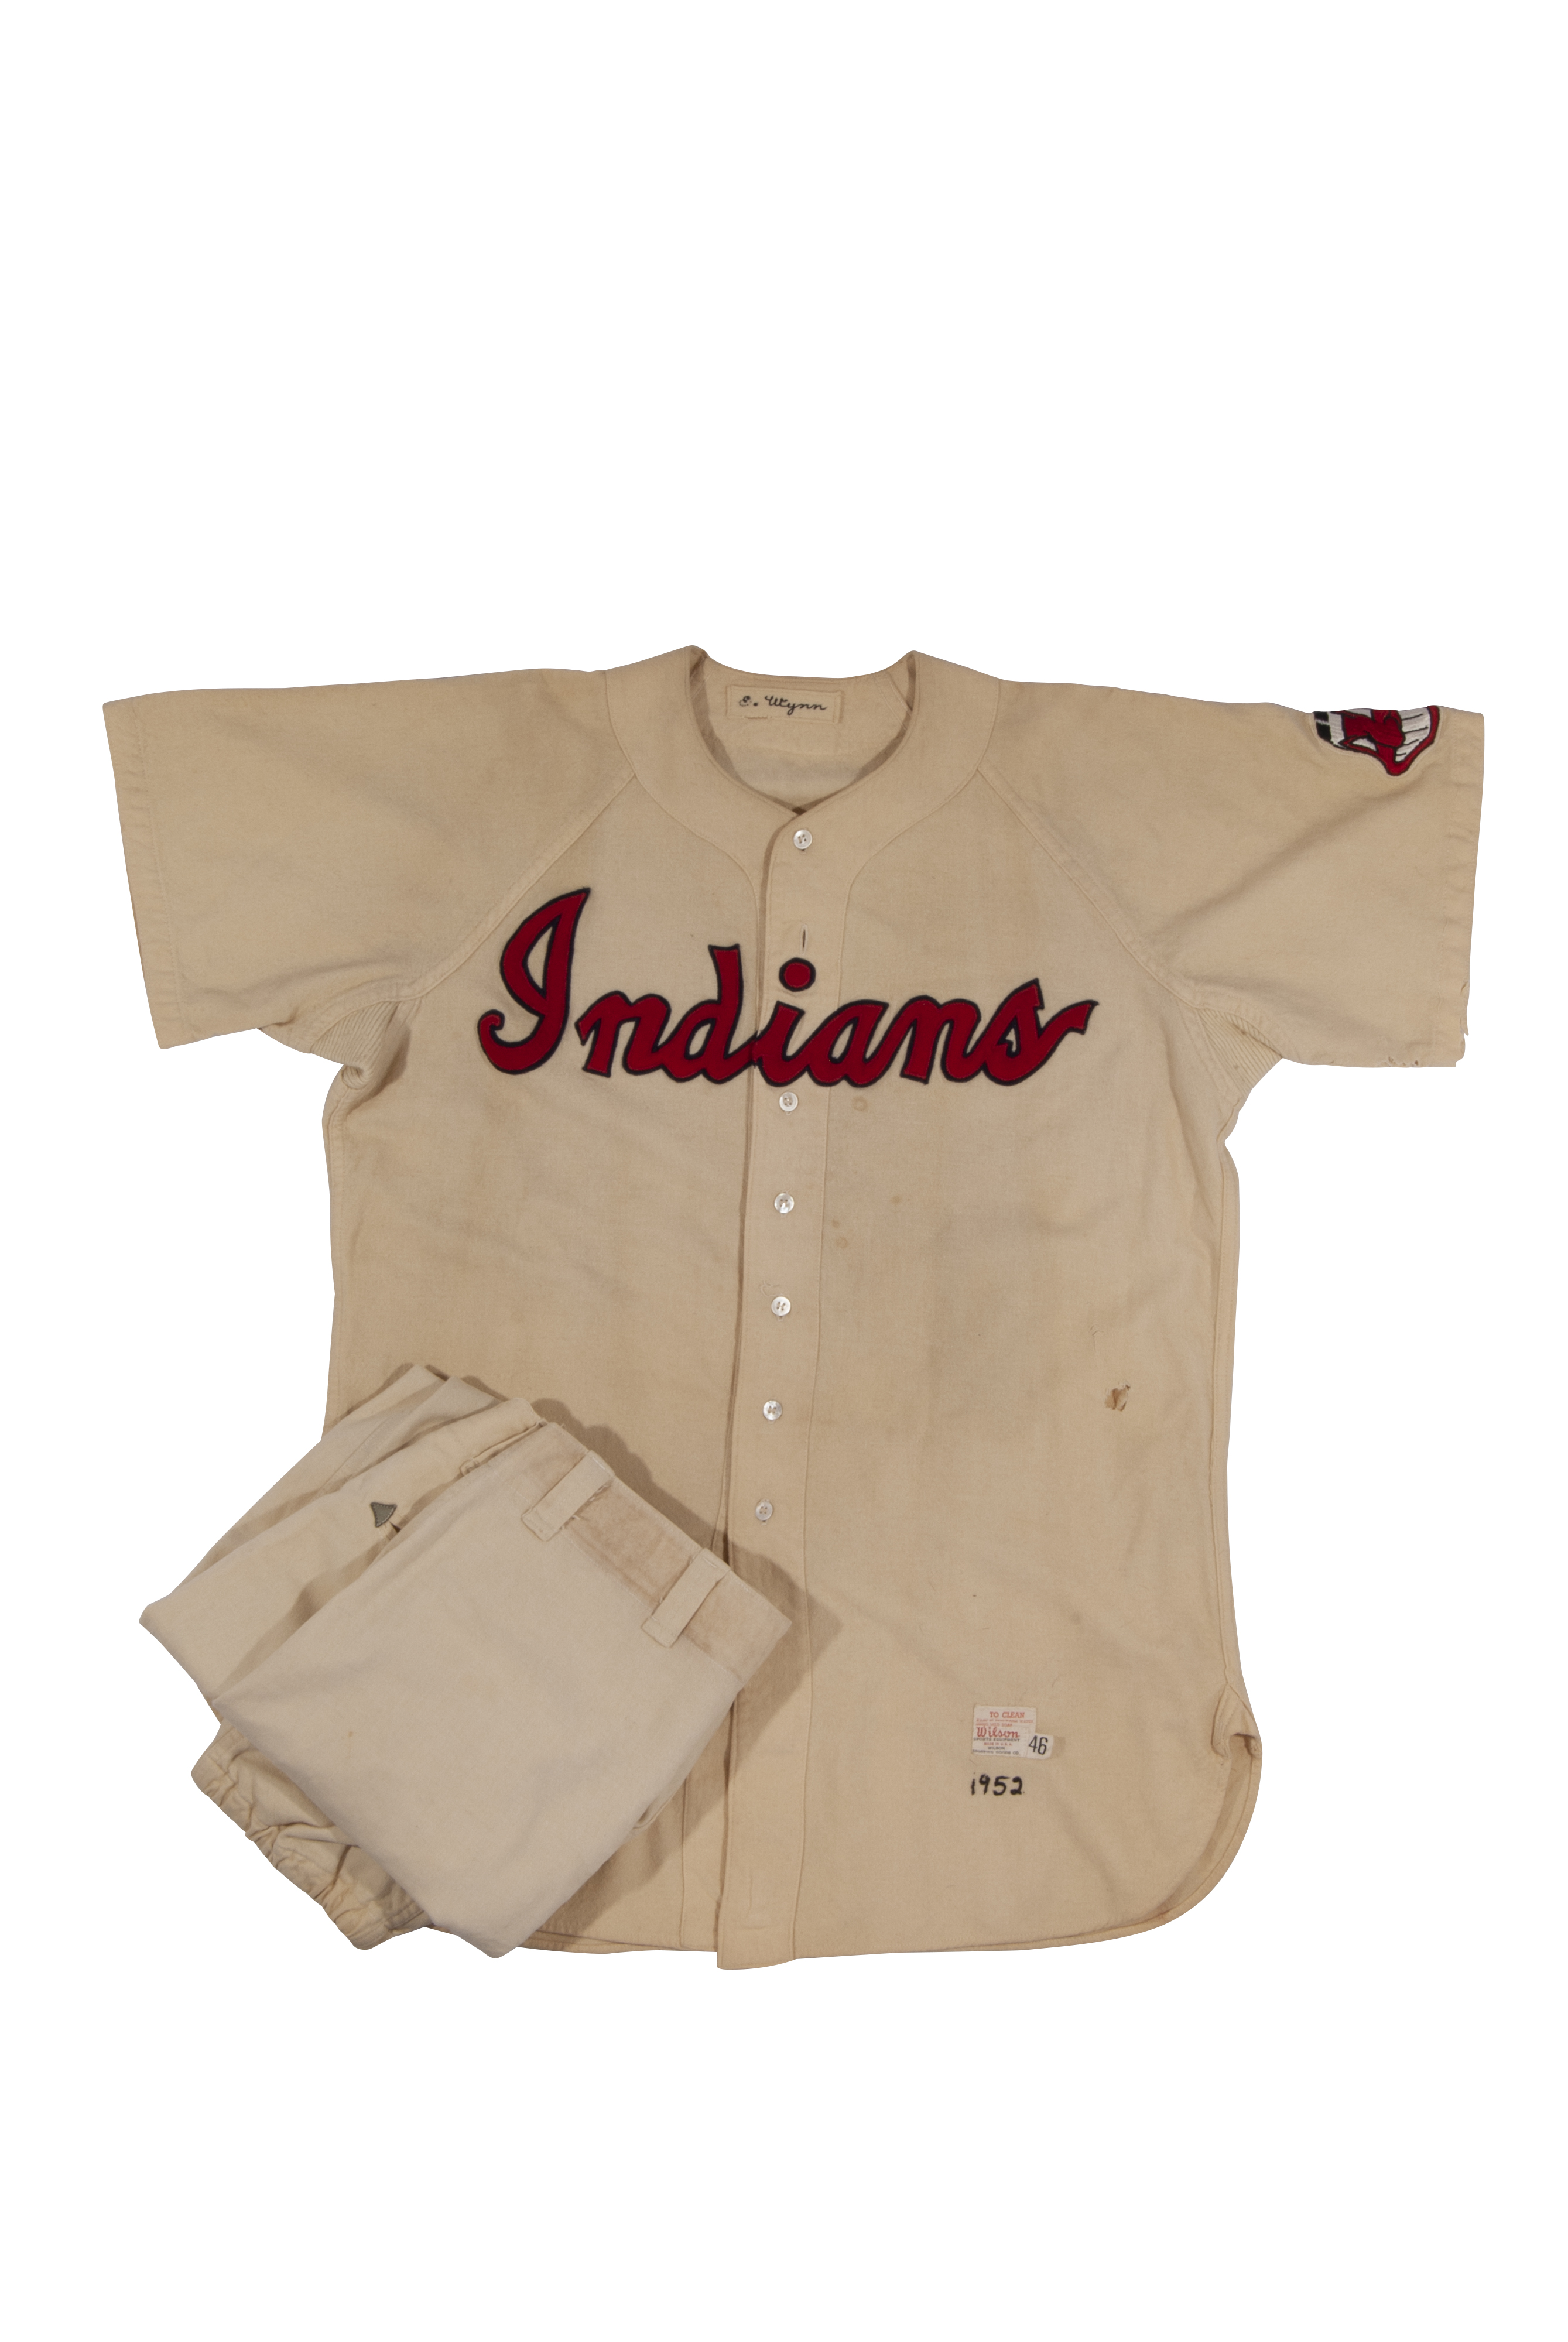 Lot Detail - 1952 EARLY WYNN CLEVELAND INDIANS GAME WORN HOME FULL